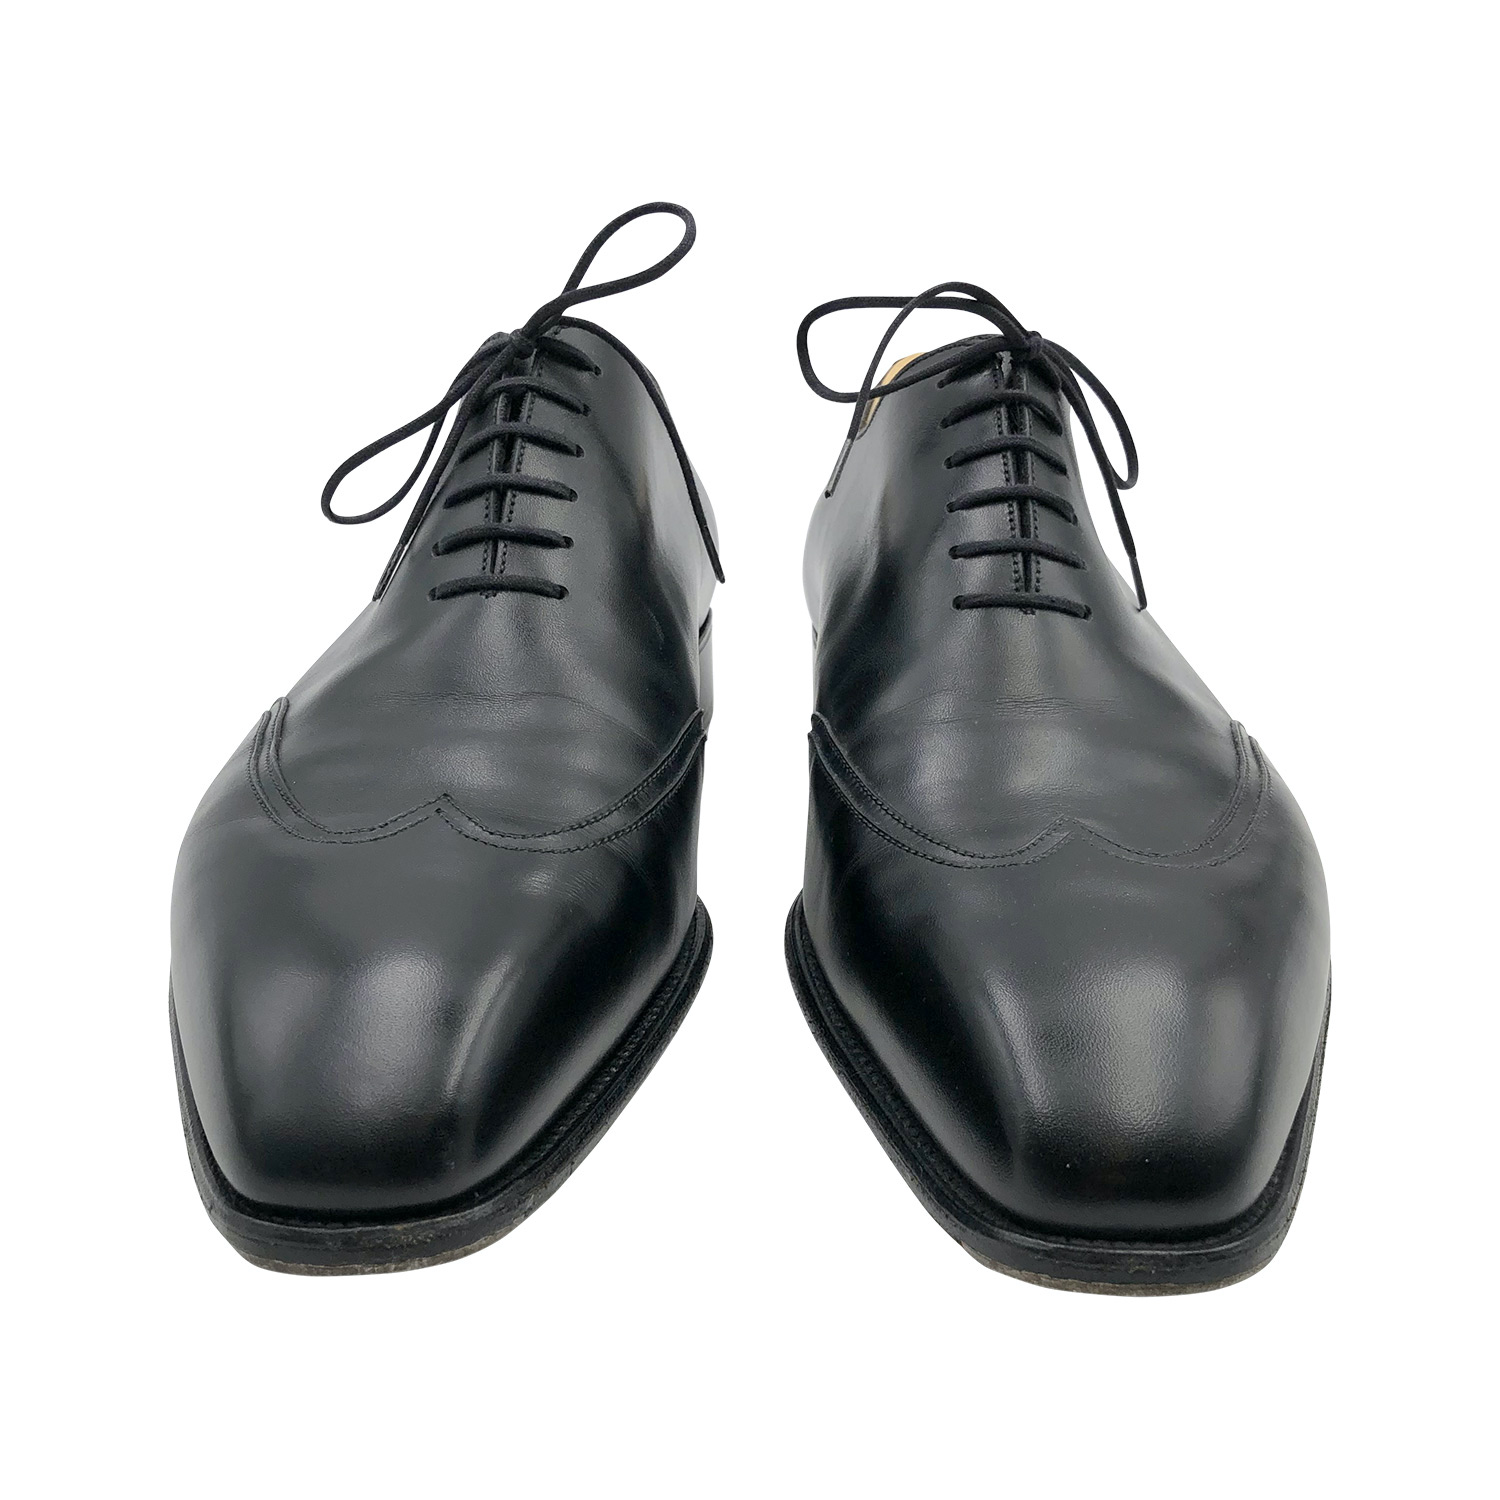 JM Weston Oxford shoes in black leather with shoe tree - DOWNTOWN ...